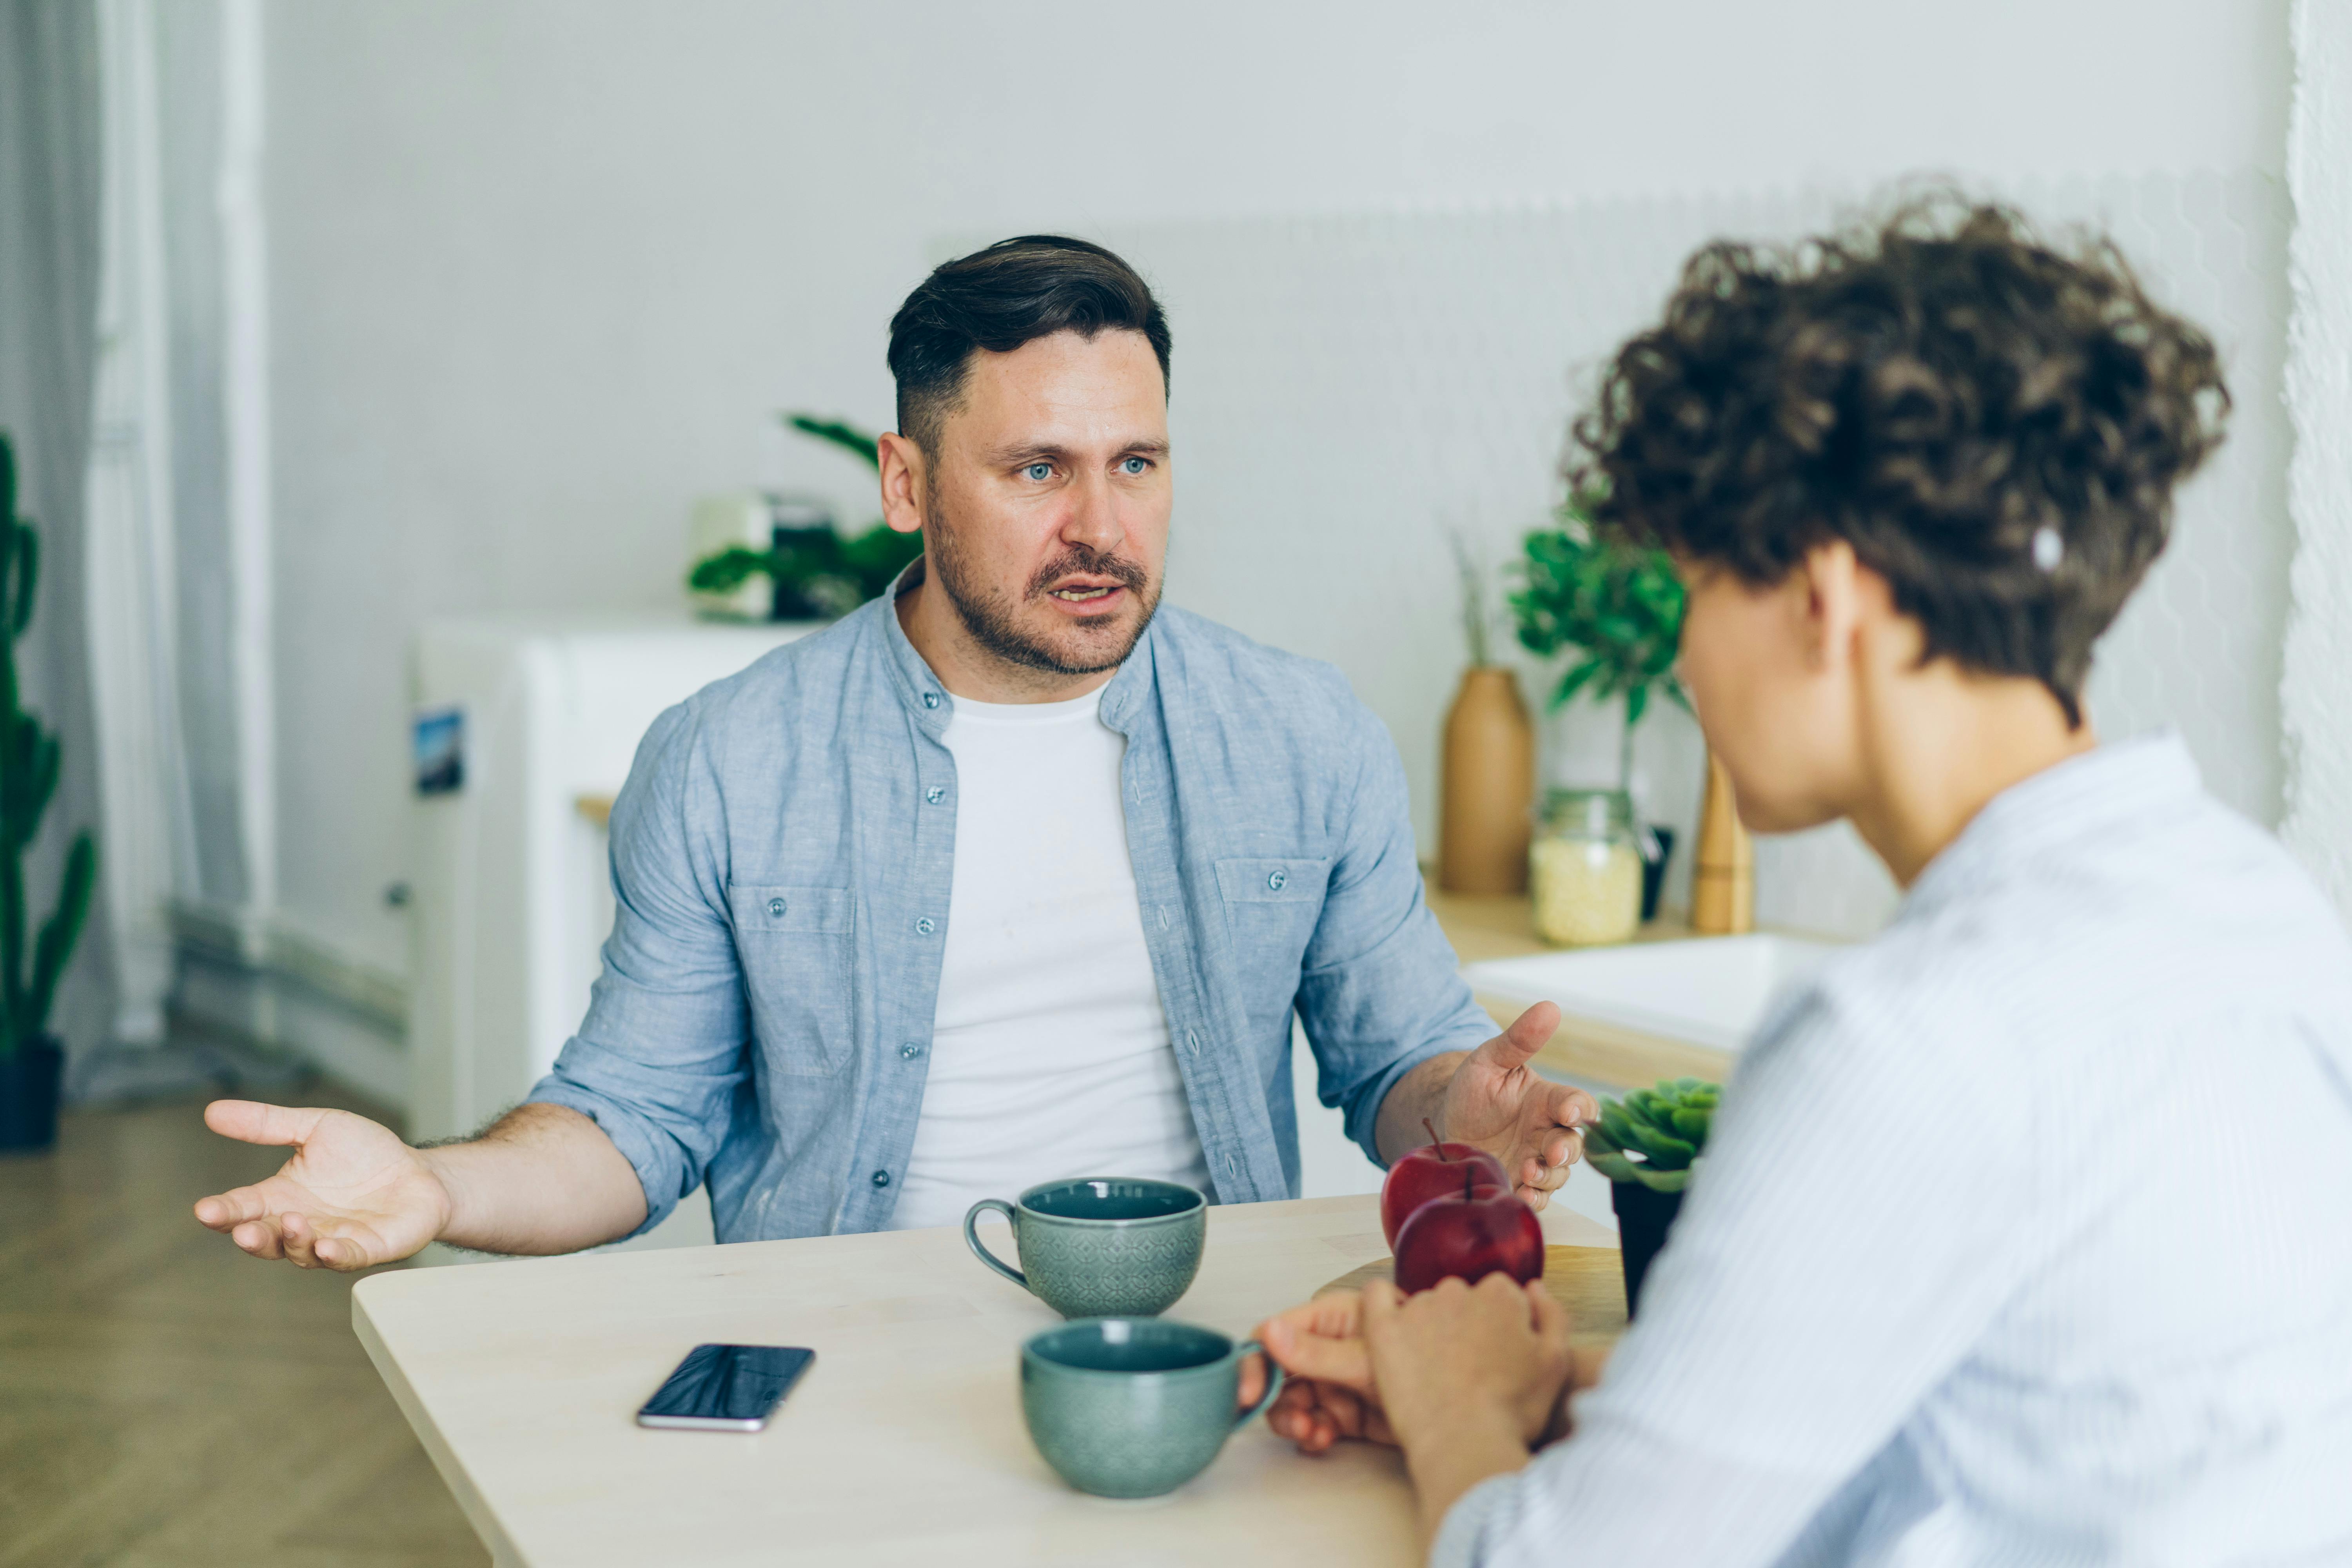 An upset man reacting badly about something while talking to a woman | Source: Pexels